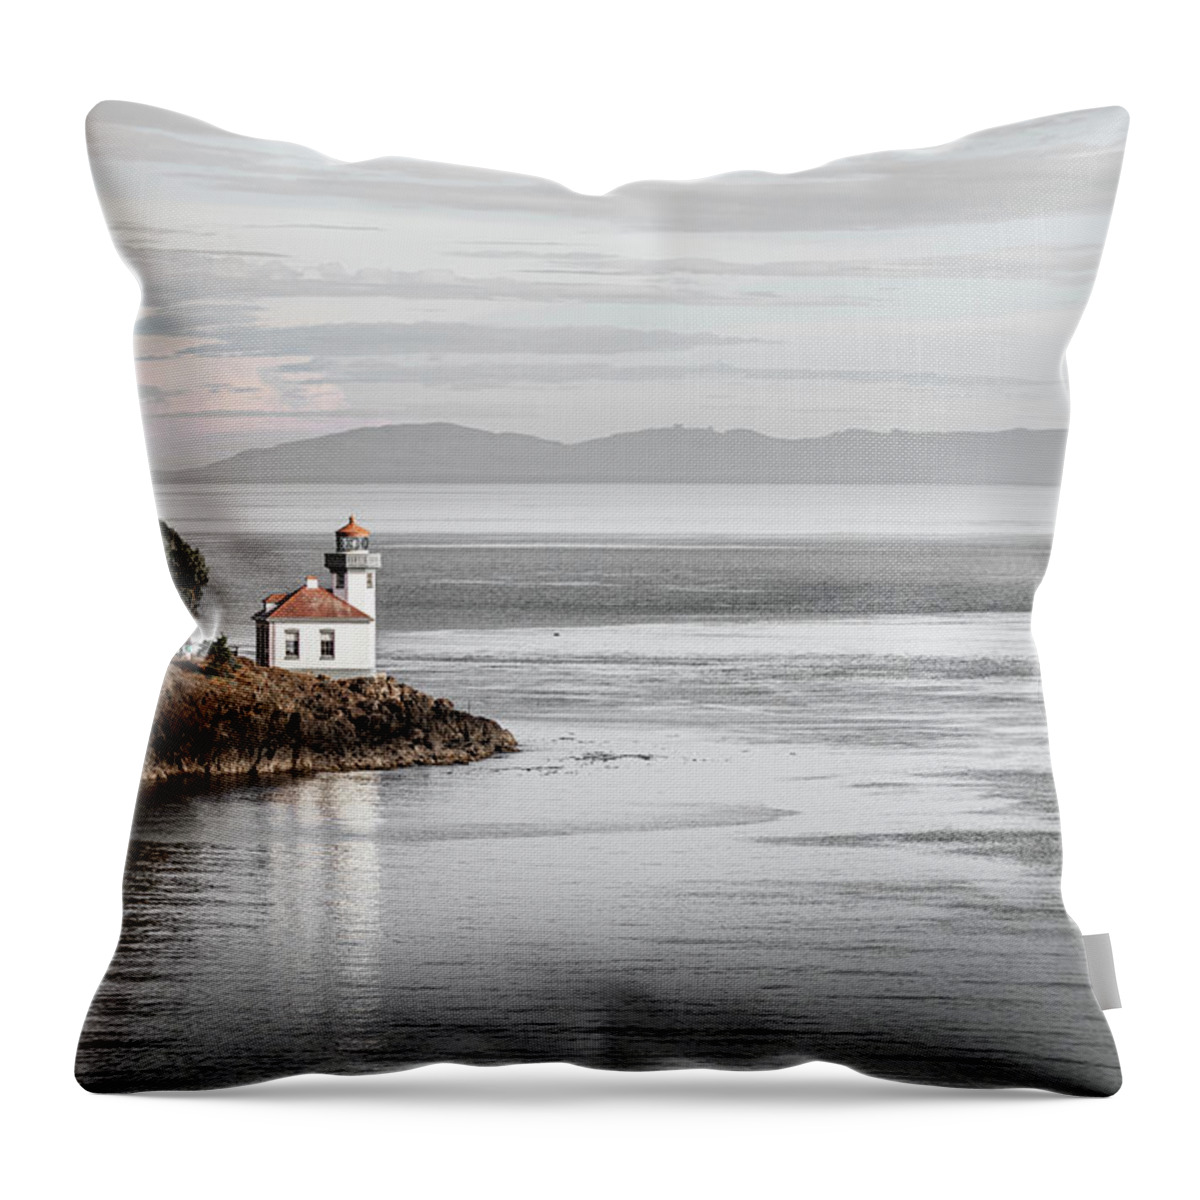 Lime Kiln Lighthouse Throw Pillow featuring the photograph Lime Kiln Lighthouse by Jordan Hill